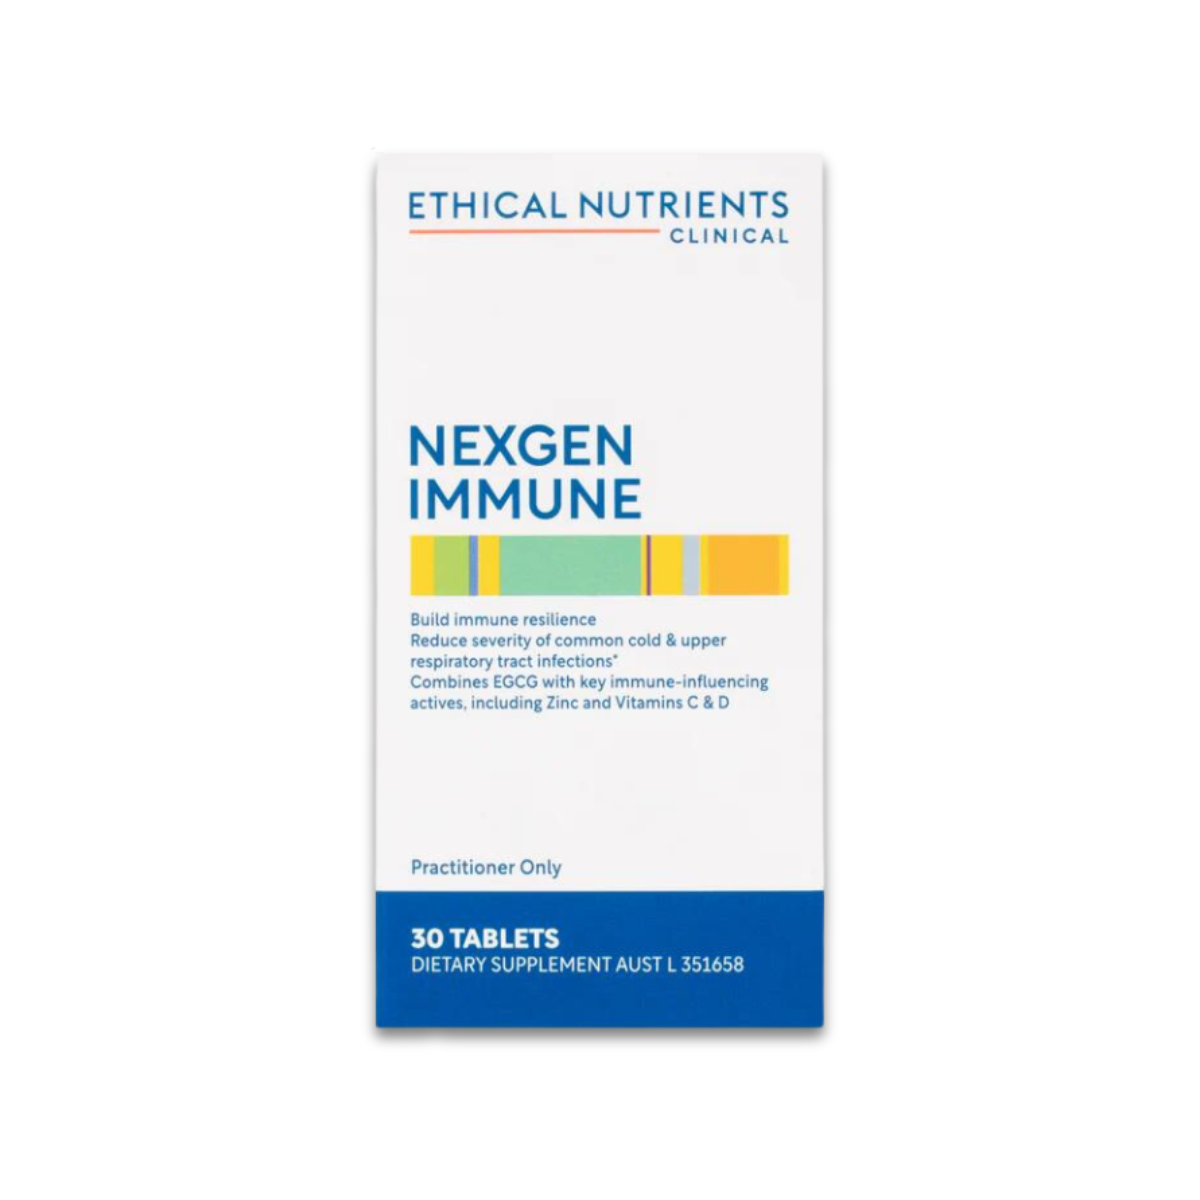 Ethical Nutrients Clinical Nexgen Immune 30 Tablets 